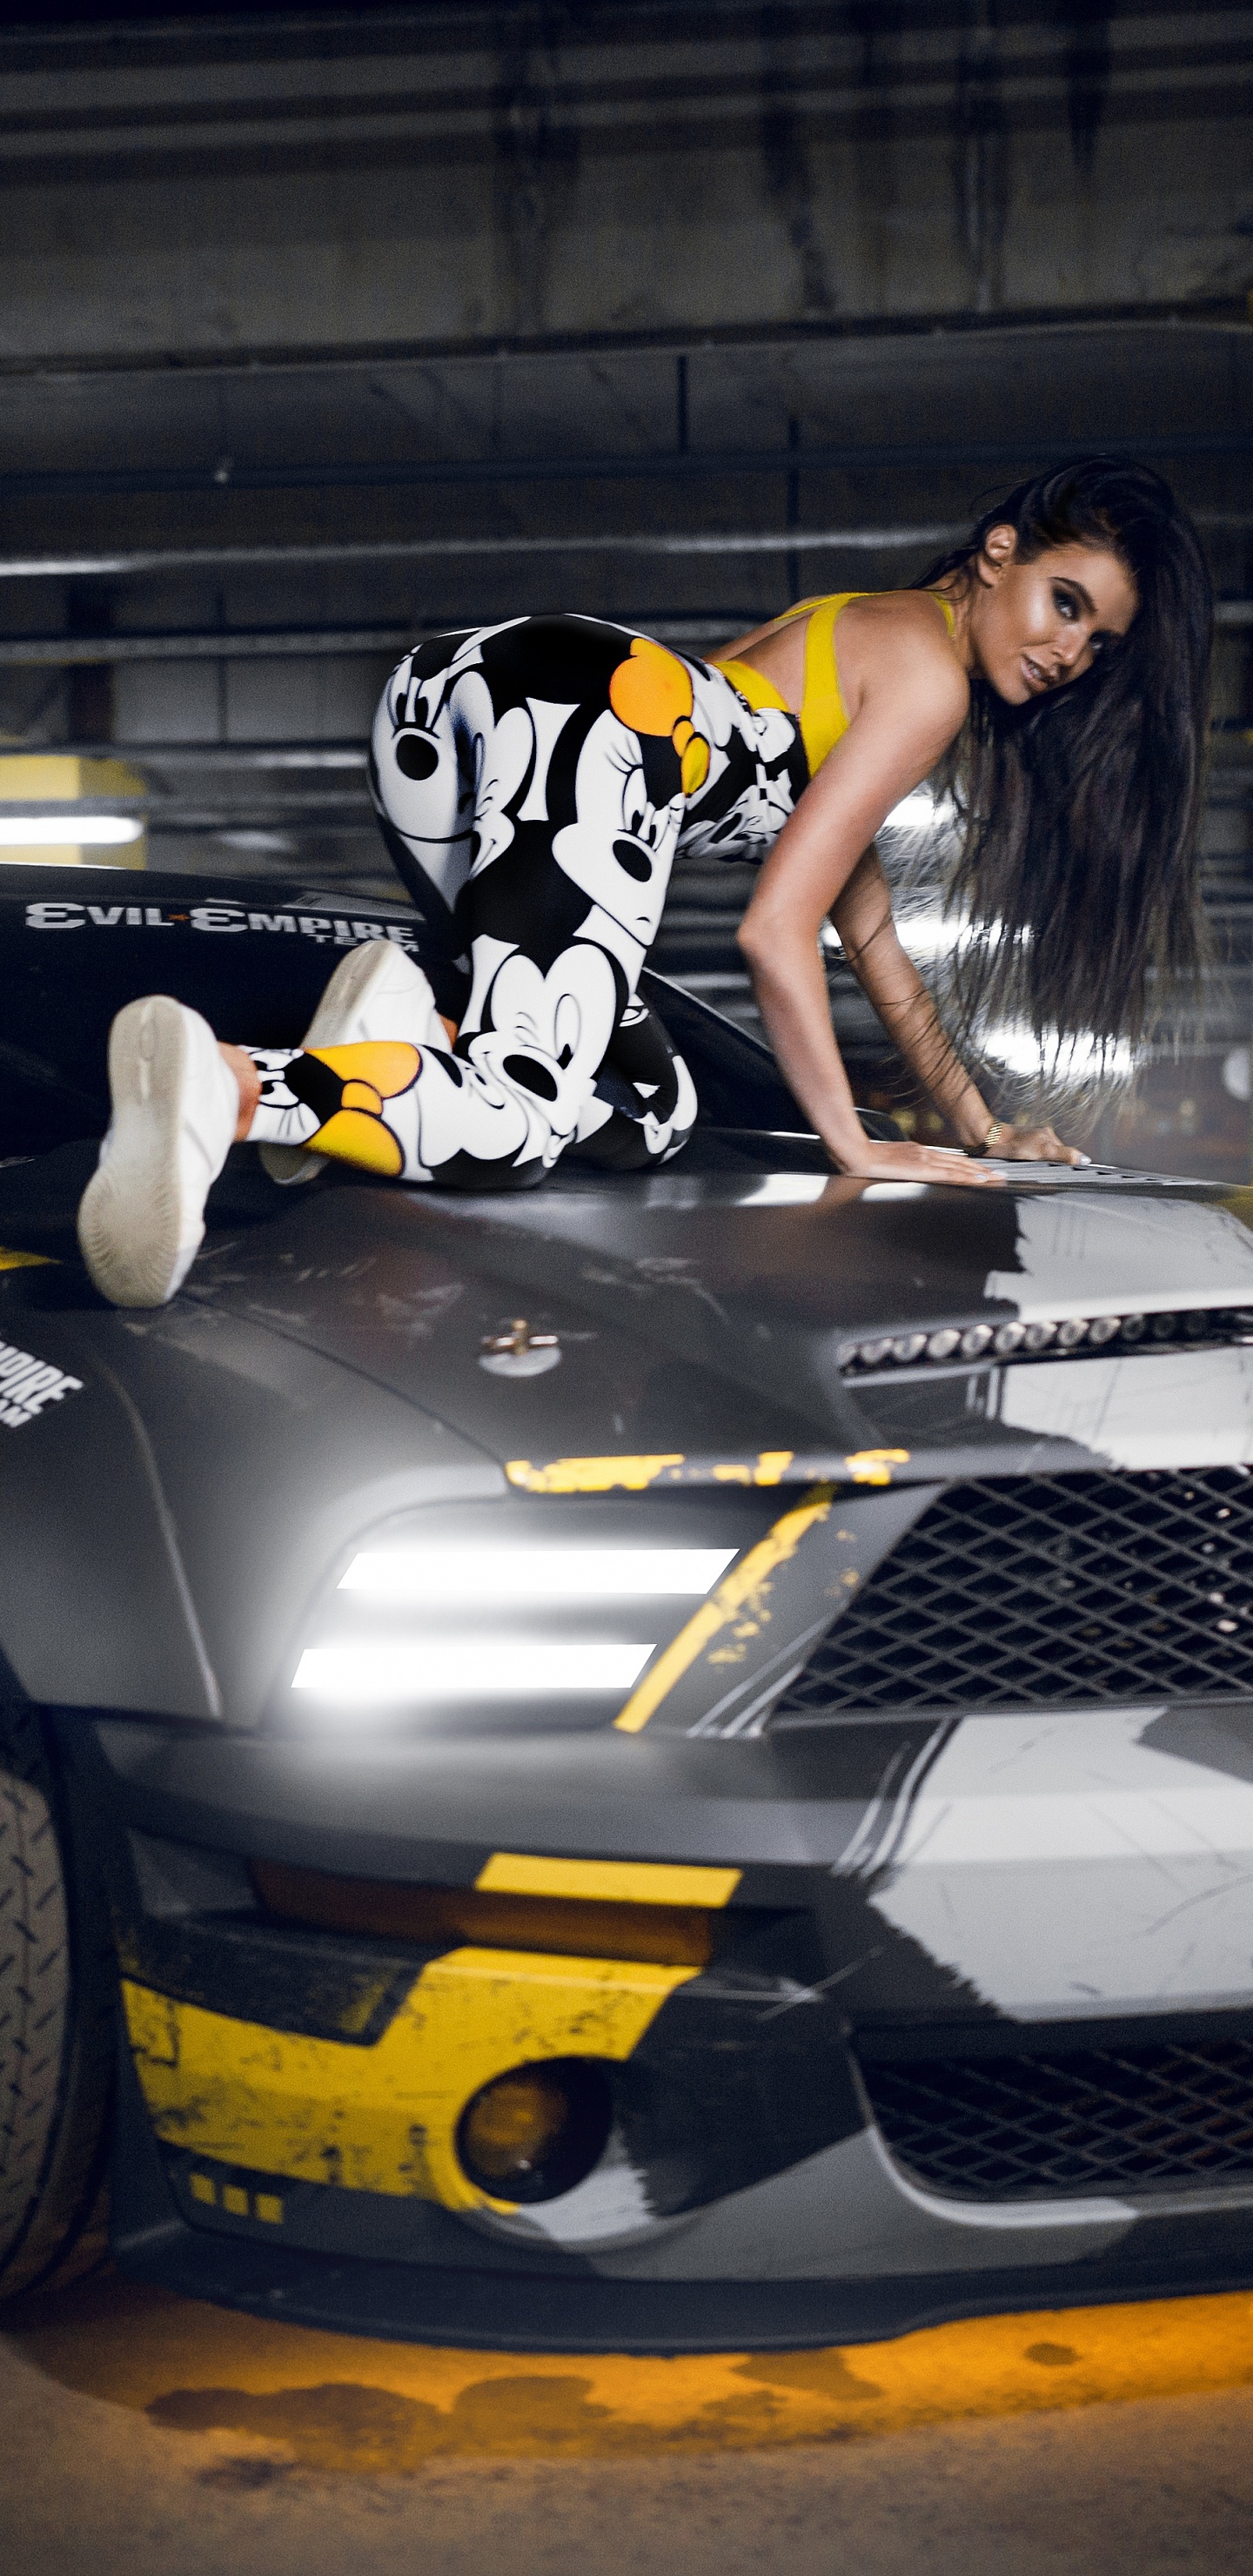 Woman in Black and White Floral Dress Riding on Black and Yellow Sports Car. Wallpaper in 1440x2960 Resolution